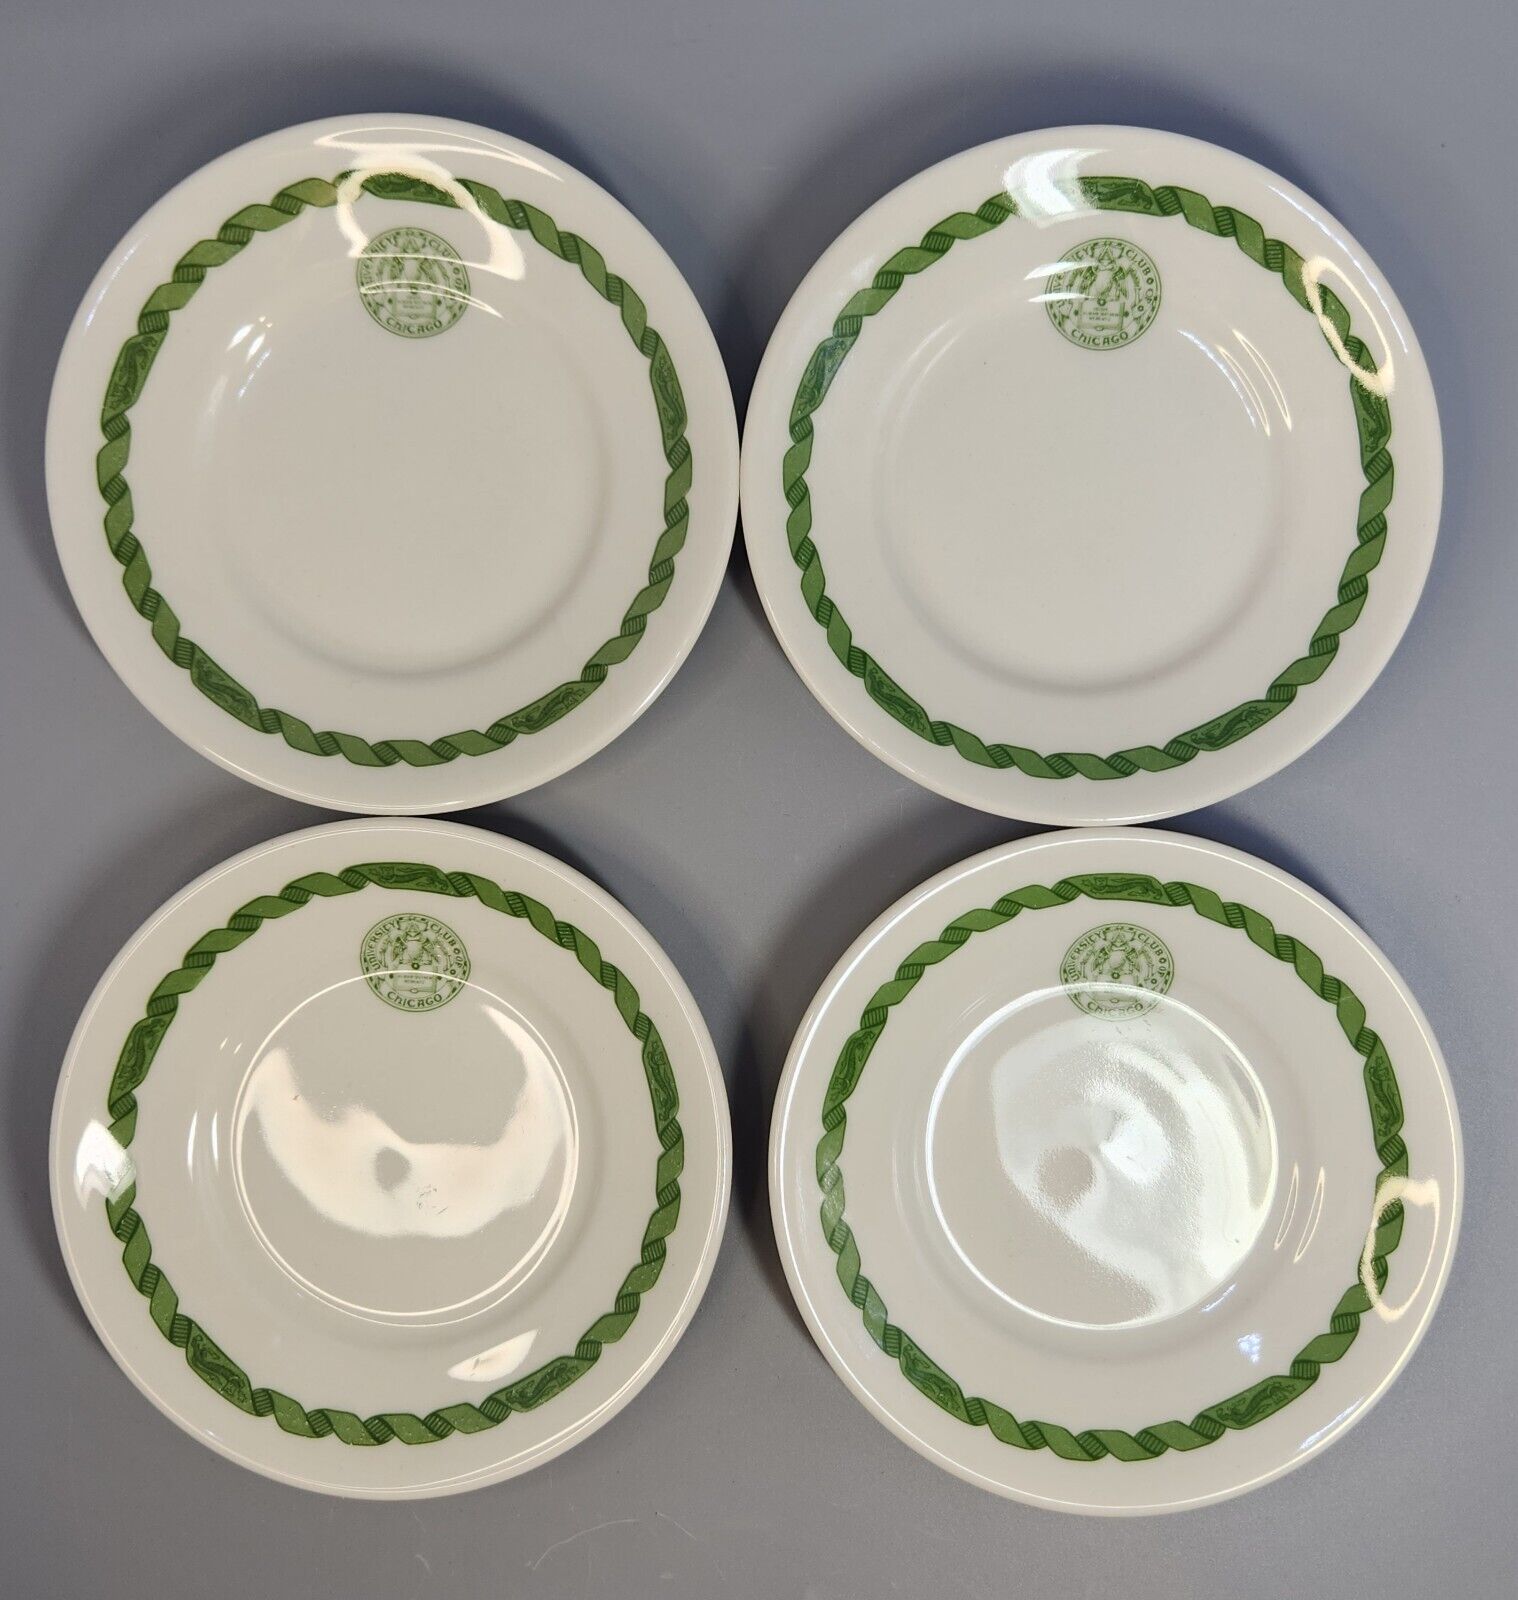 VTG Shenango China Plate Coffee Cup Saucer University Club Of Chicago Set Of 4